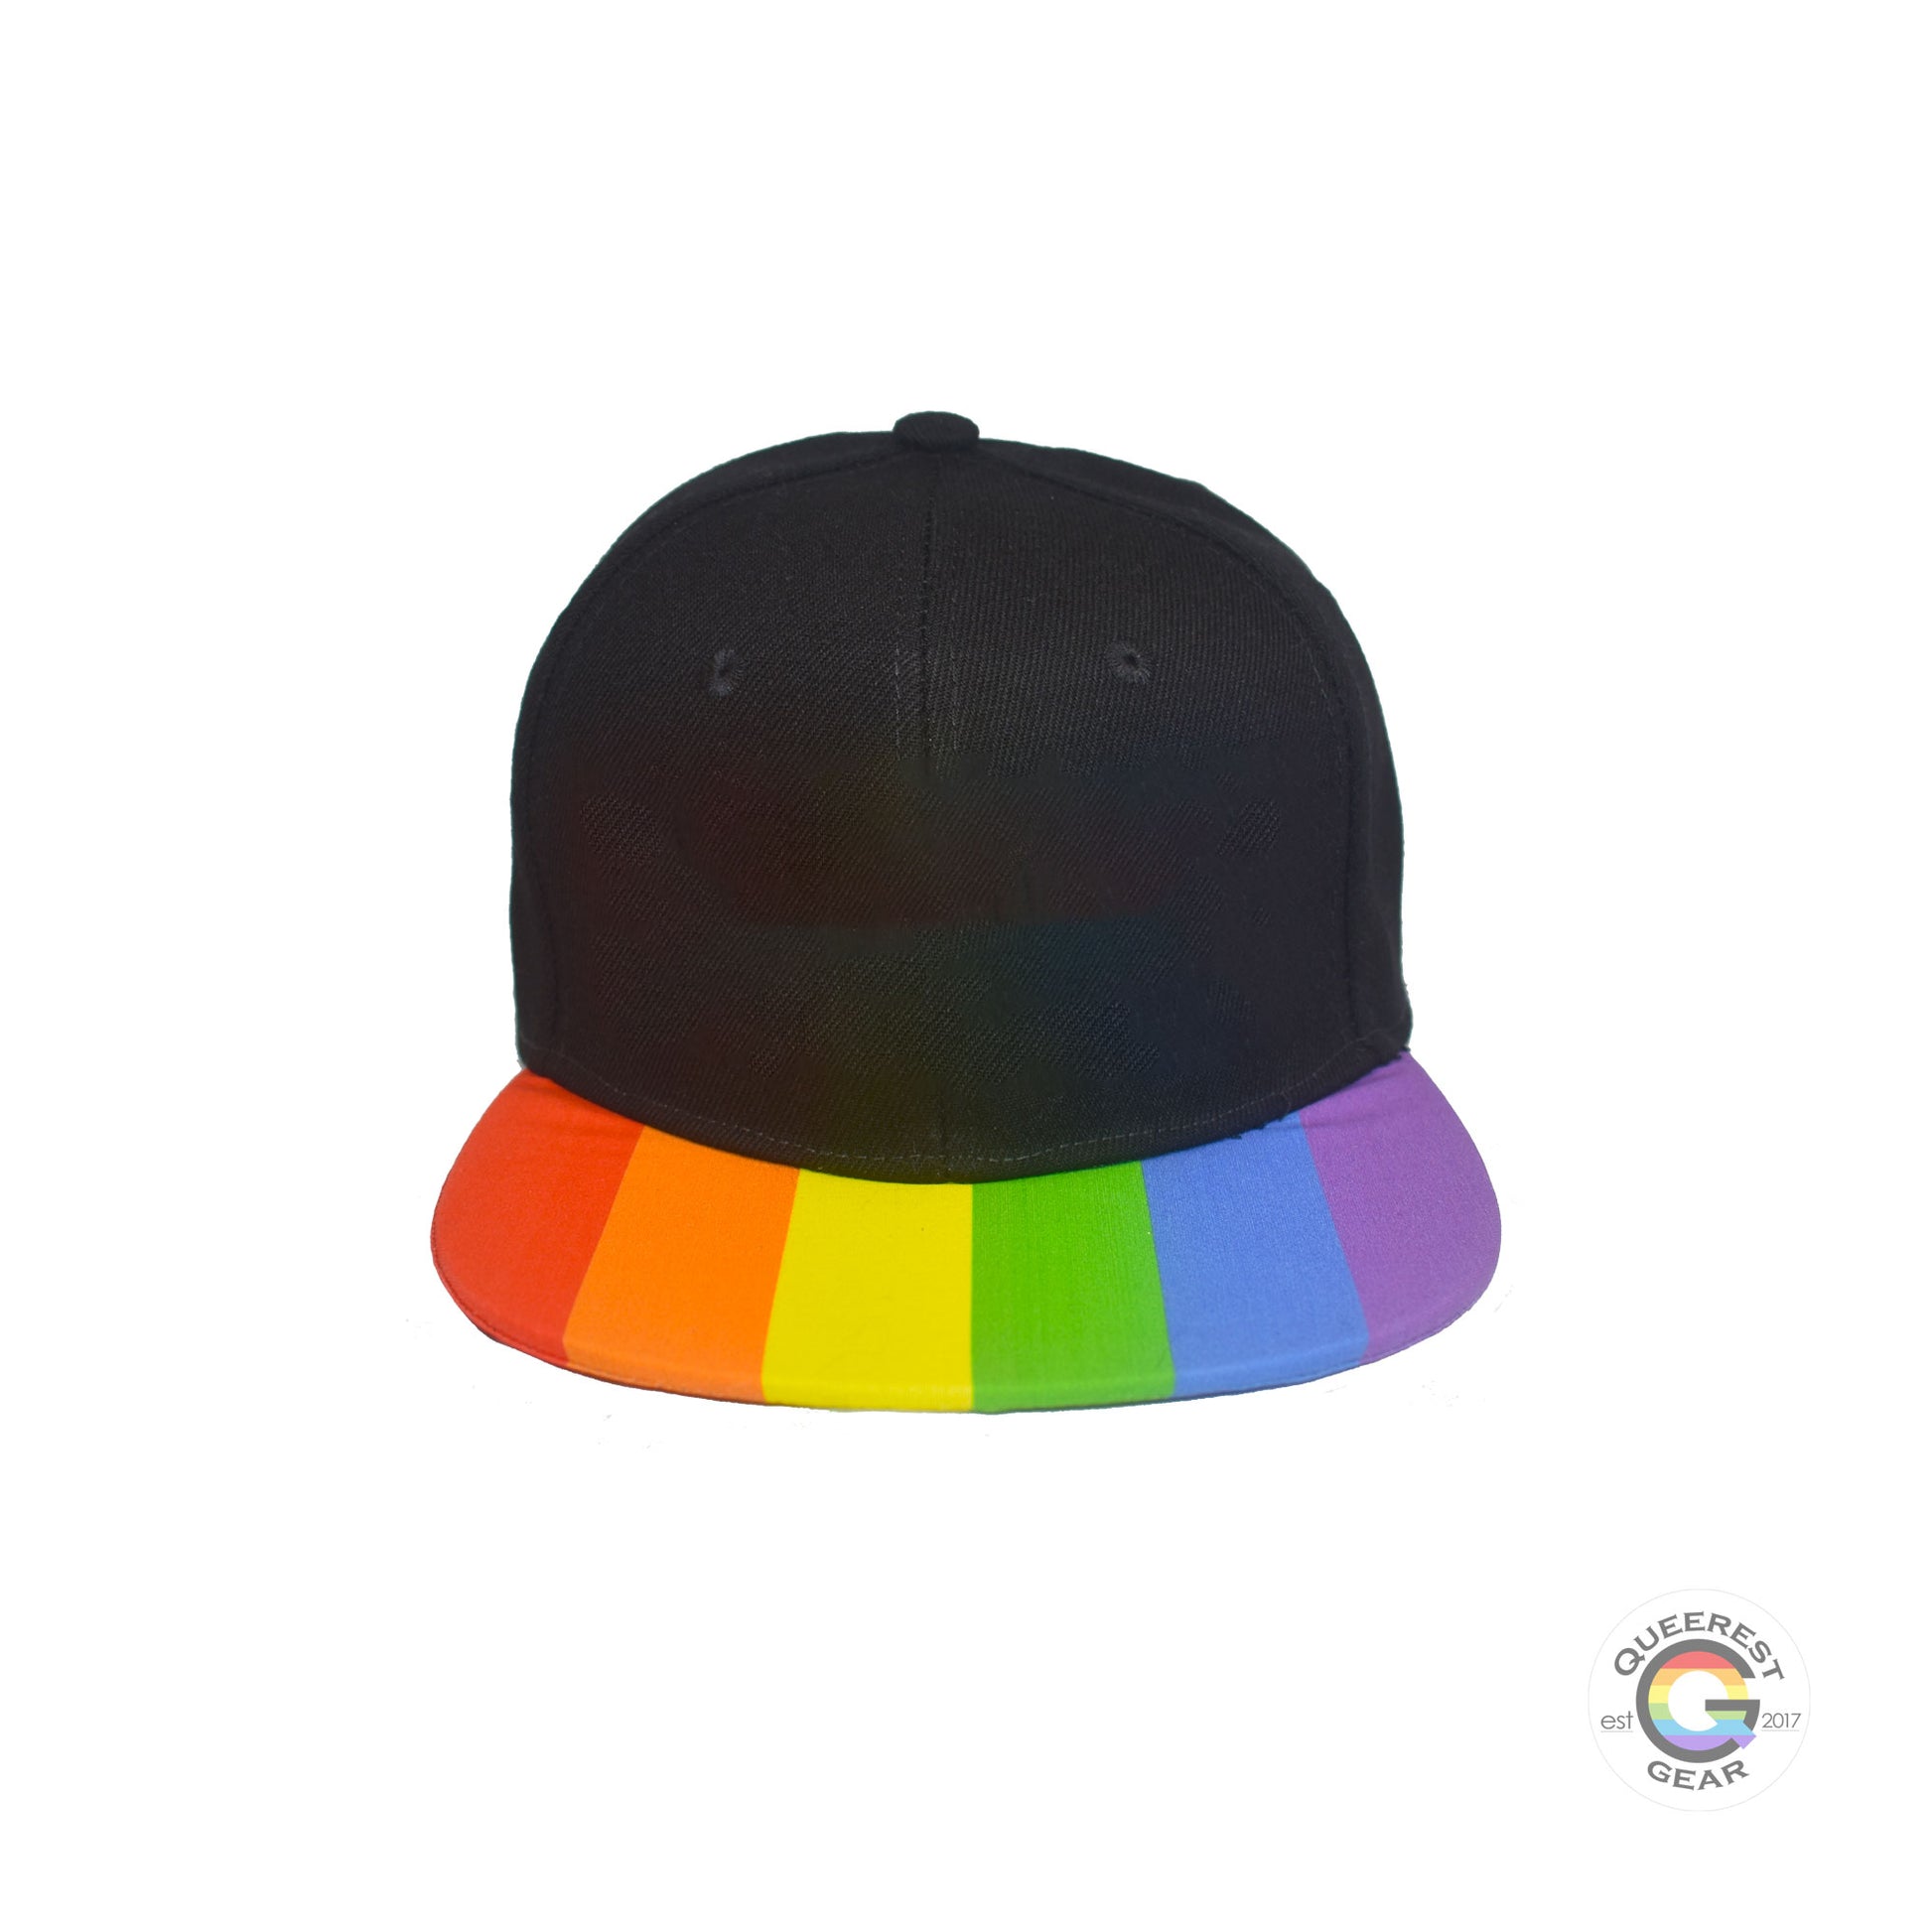 Black flat bill snapback hat. The brim has the rainbow pride flag on both sides. Front view